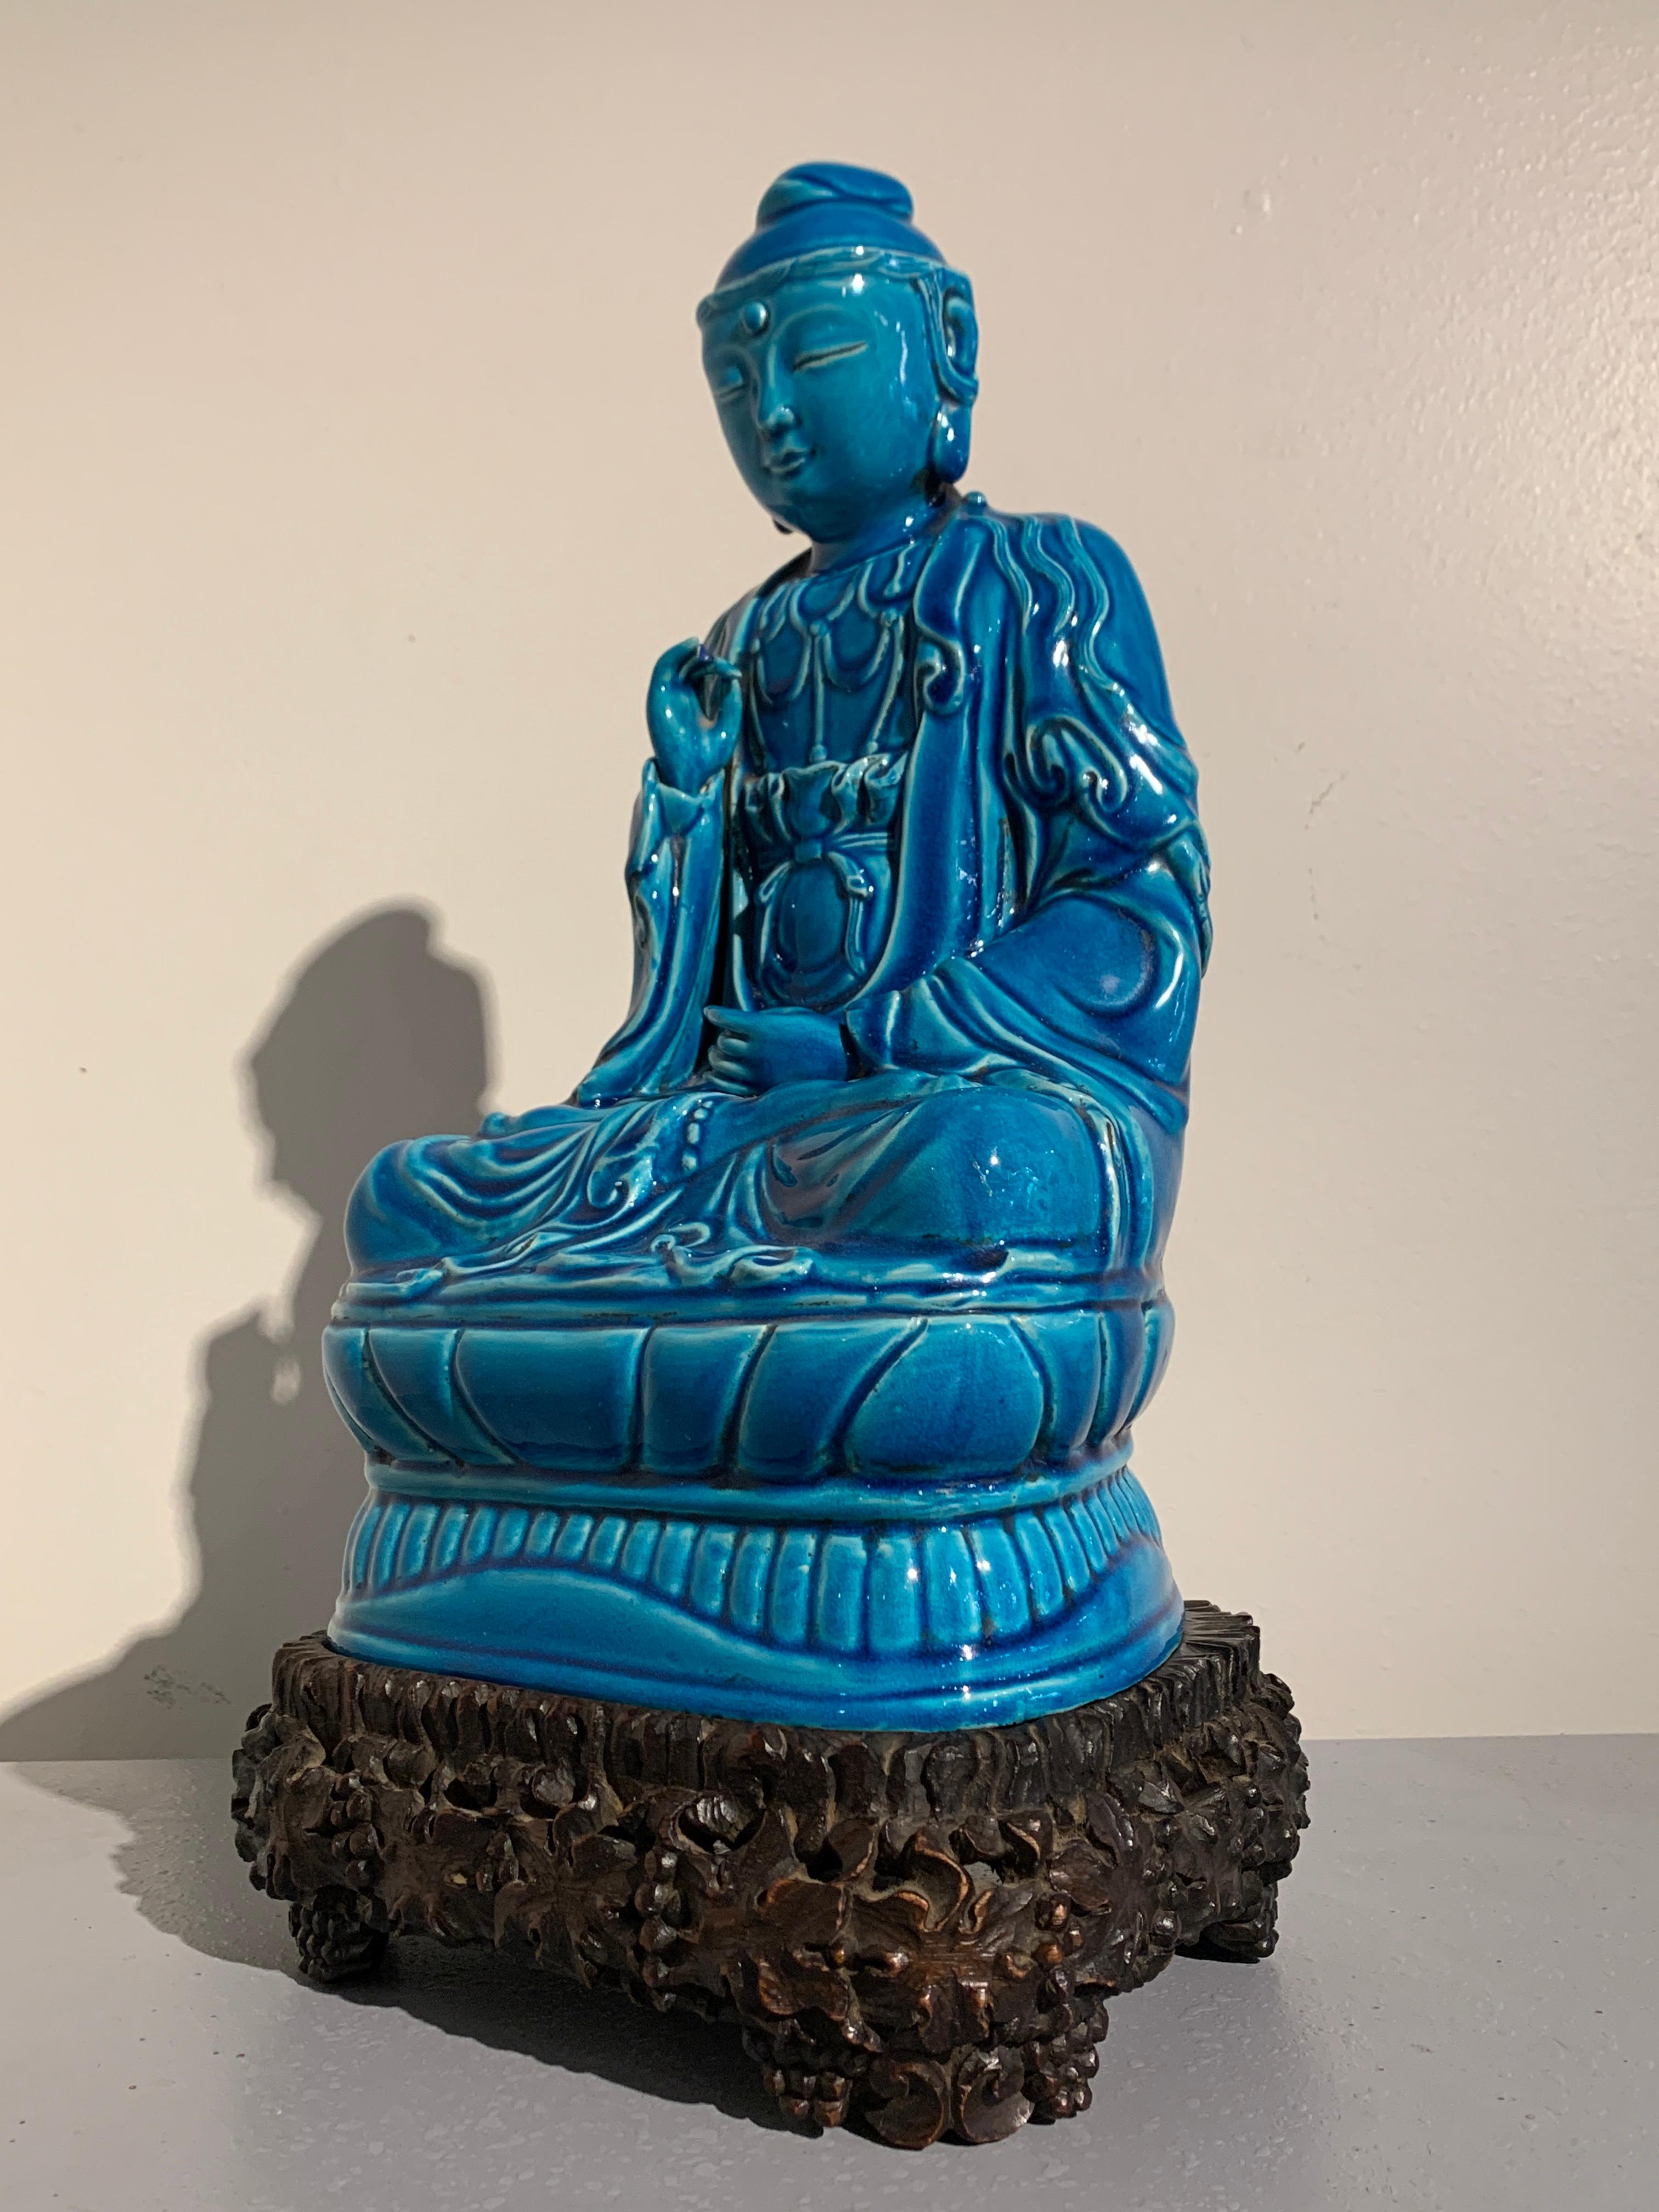 A gorgeous Chinese turquoise glazed porcelain figure of the Guanyin, the Bodhisattva of Compassion and Mercy, very late Qing Dynasty, circa 1910, China. 

This beautiful sculpture of Guanyin is crafted in porcelain and glazed all-over in a deep,